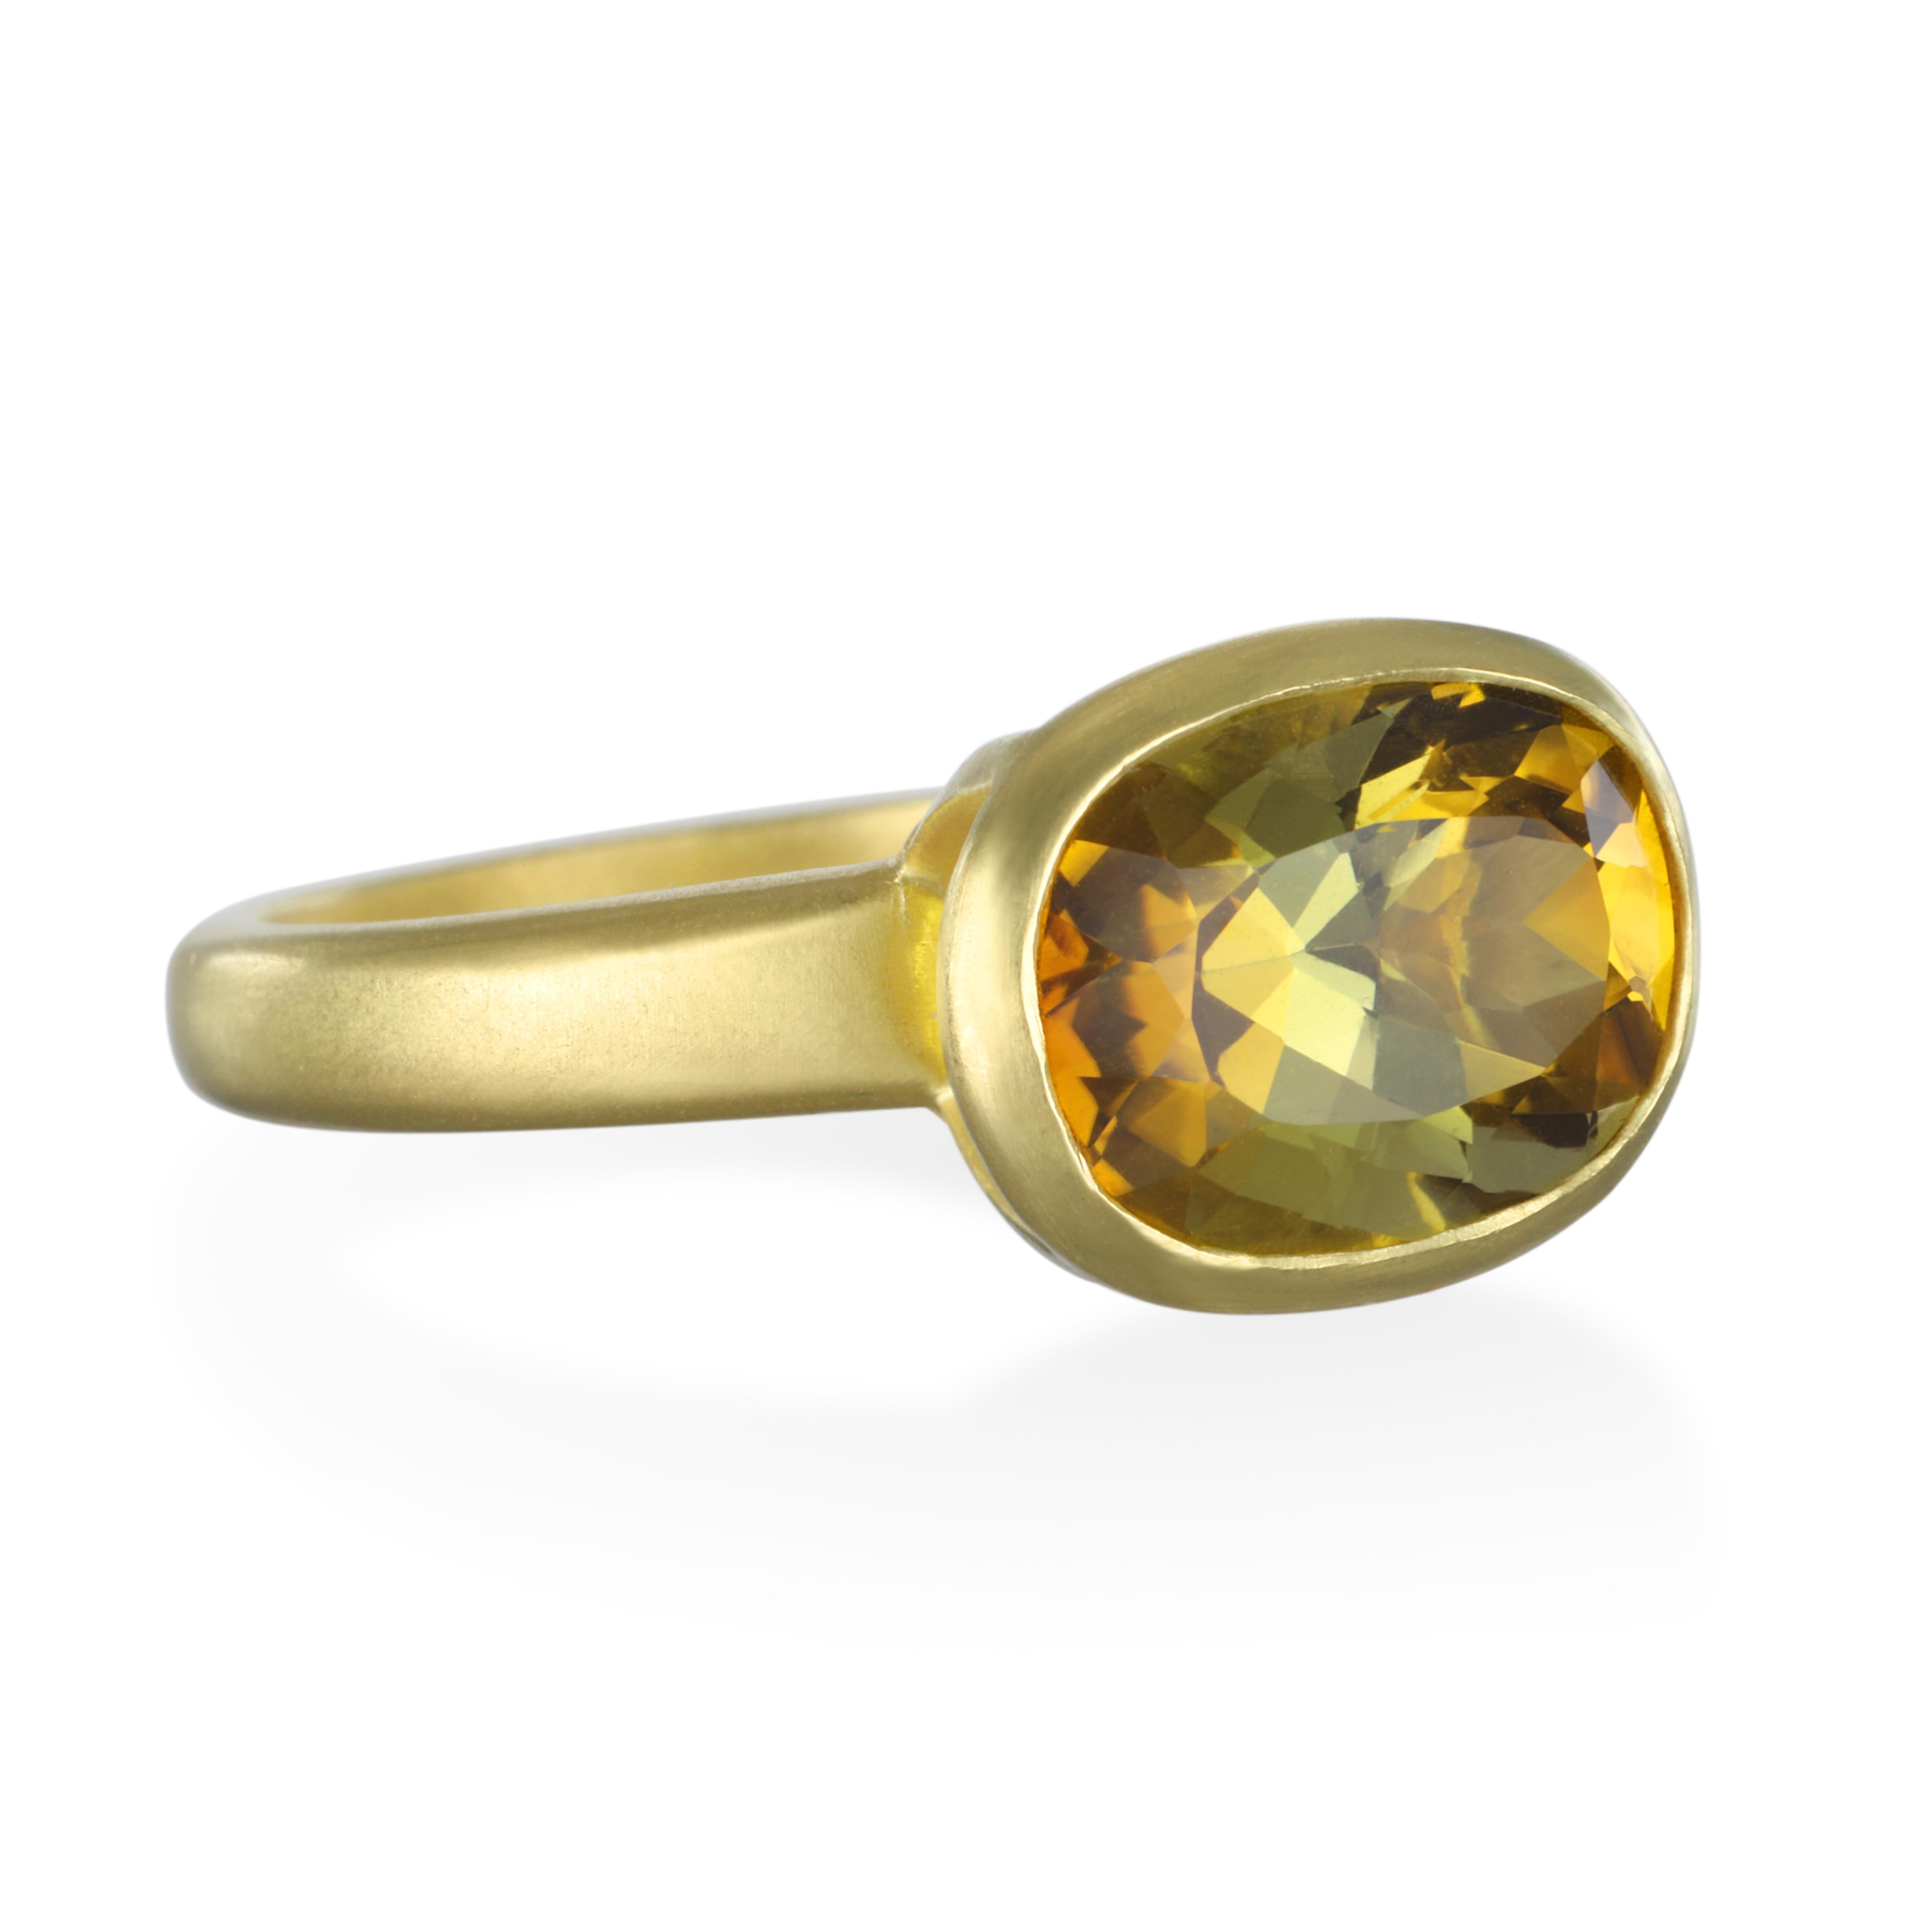 Cushion Cut Yellow-Olive Tourmaline Ring.
The translucent olive-green color of this stylish tourmaline ring mesmerizes and makes a statement all on its own. Its rich hue is not only elegant, but serves to embody all of the textures and colors